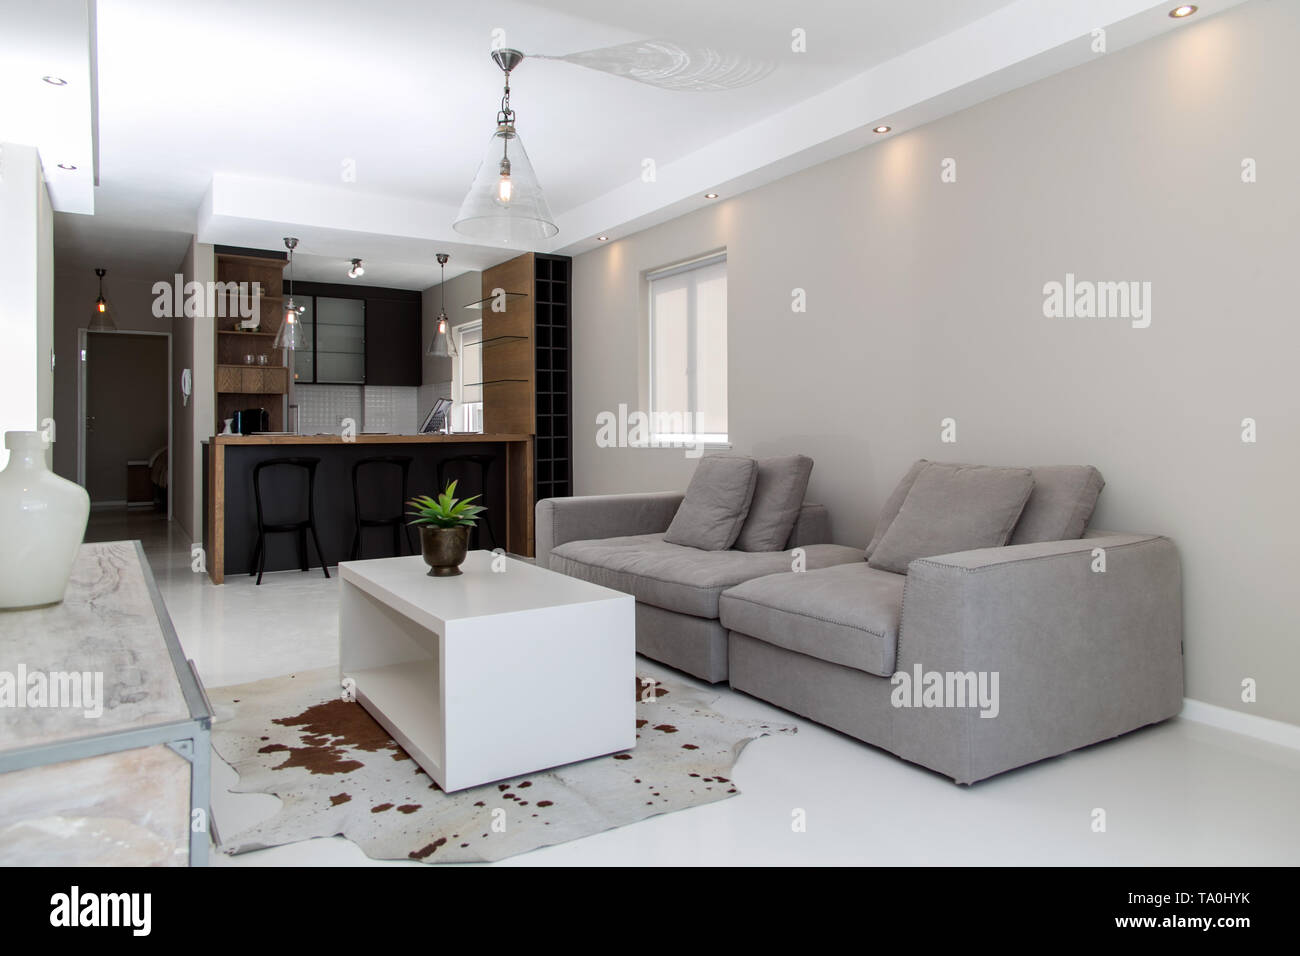 A Modern And Small Yet Luxurious Living Room Setup In A Small Apartment Stock Photo Alamy